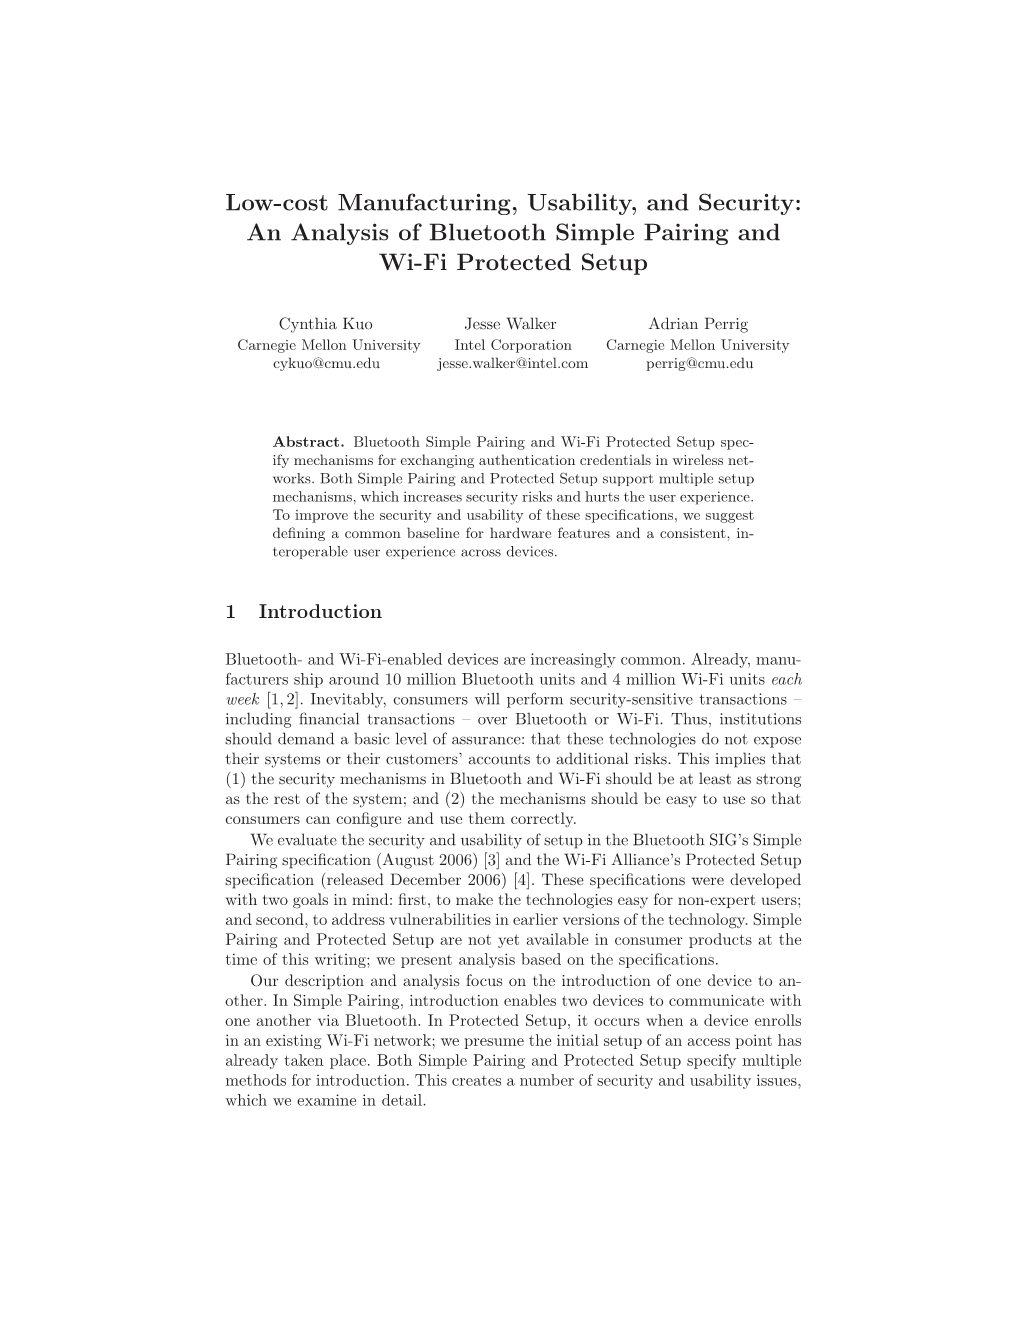 Low-Cost Manufacturing, Usability, and Security: an Analysis of Bluetooth Simple Pairing and Wi-Fi Protected Setup